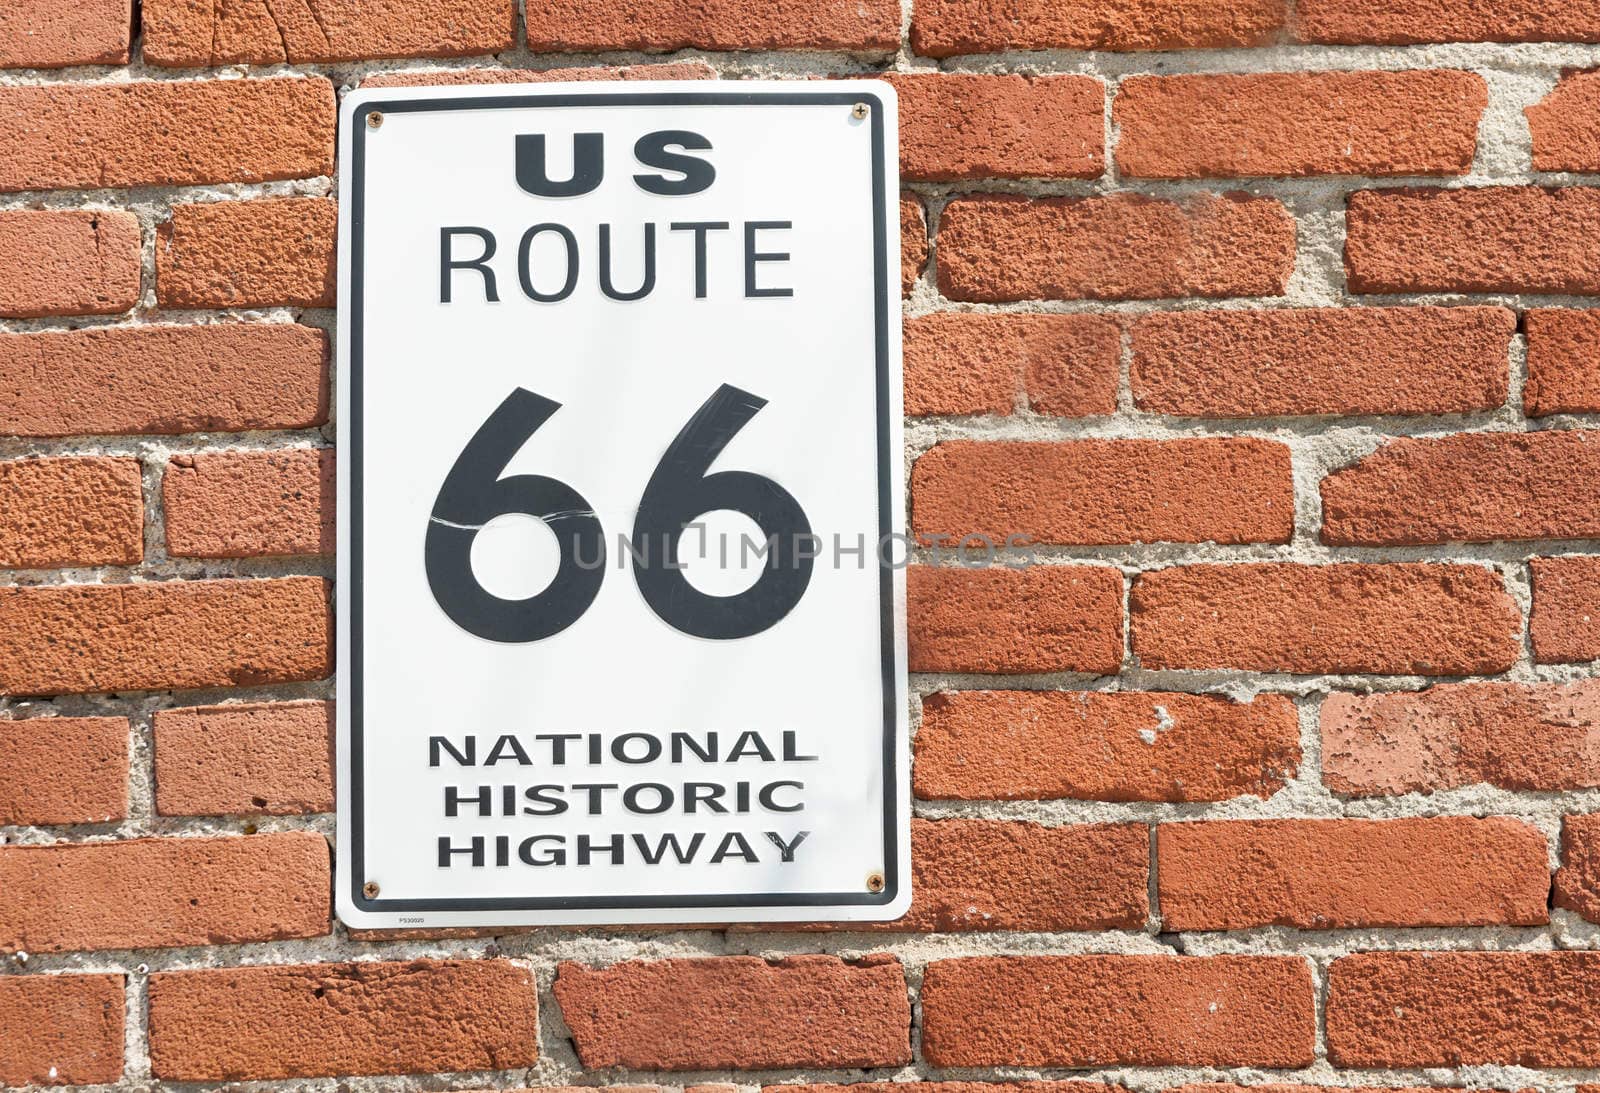 US Route 66 National Historic Highway sign on red brick wall, Galena, Kansas, USA